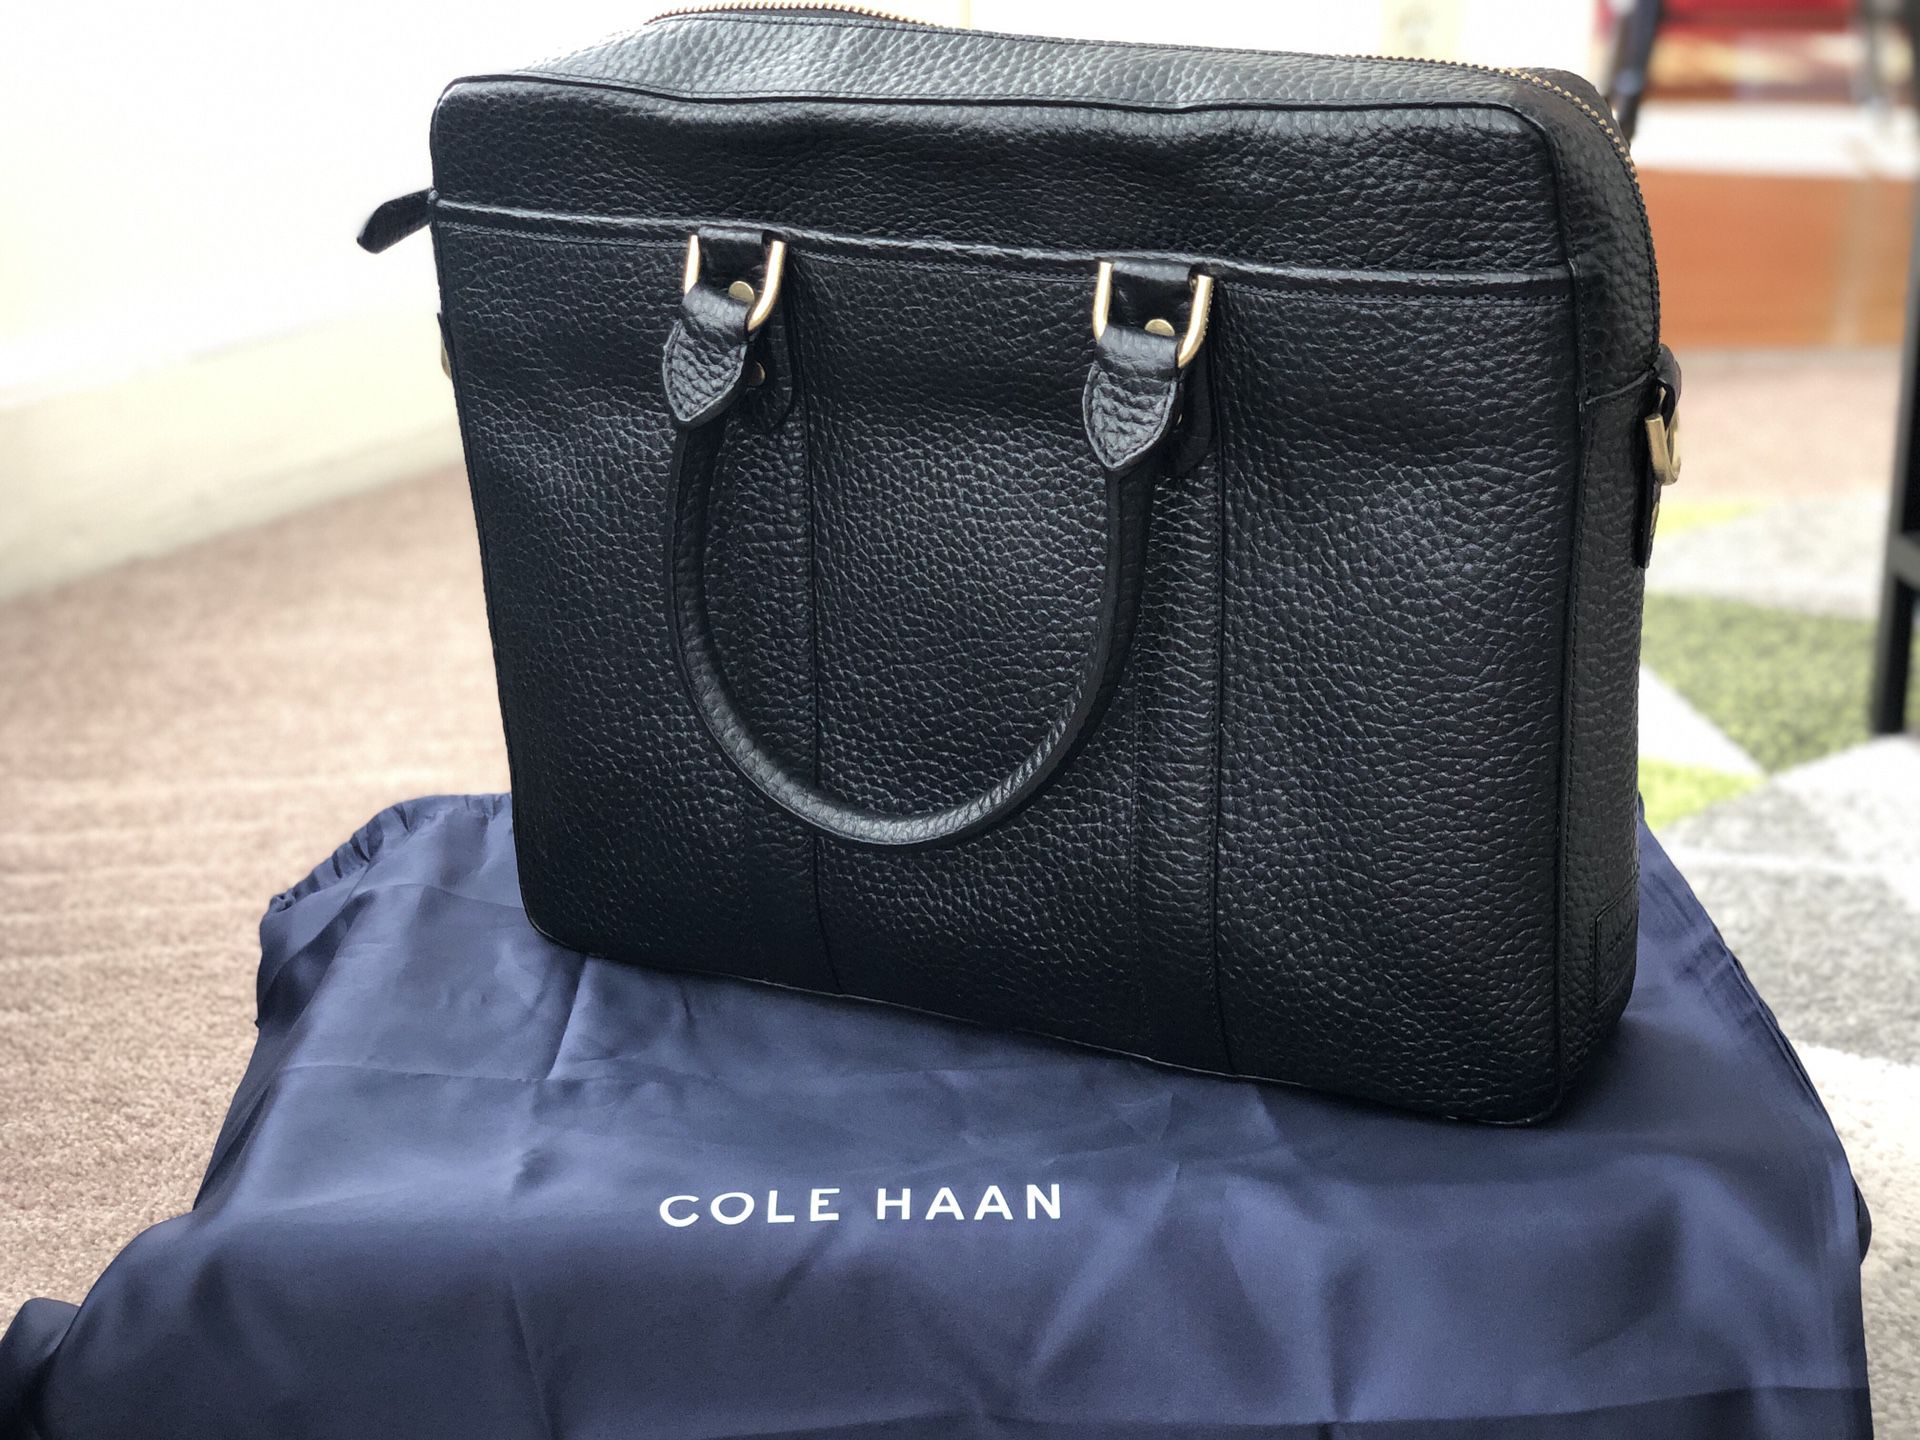 Cole Haan Black Leather Briefcase